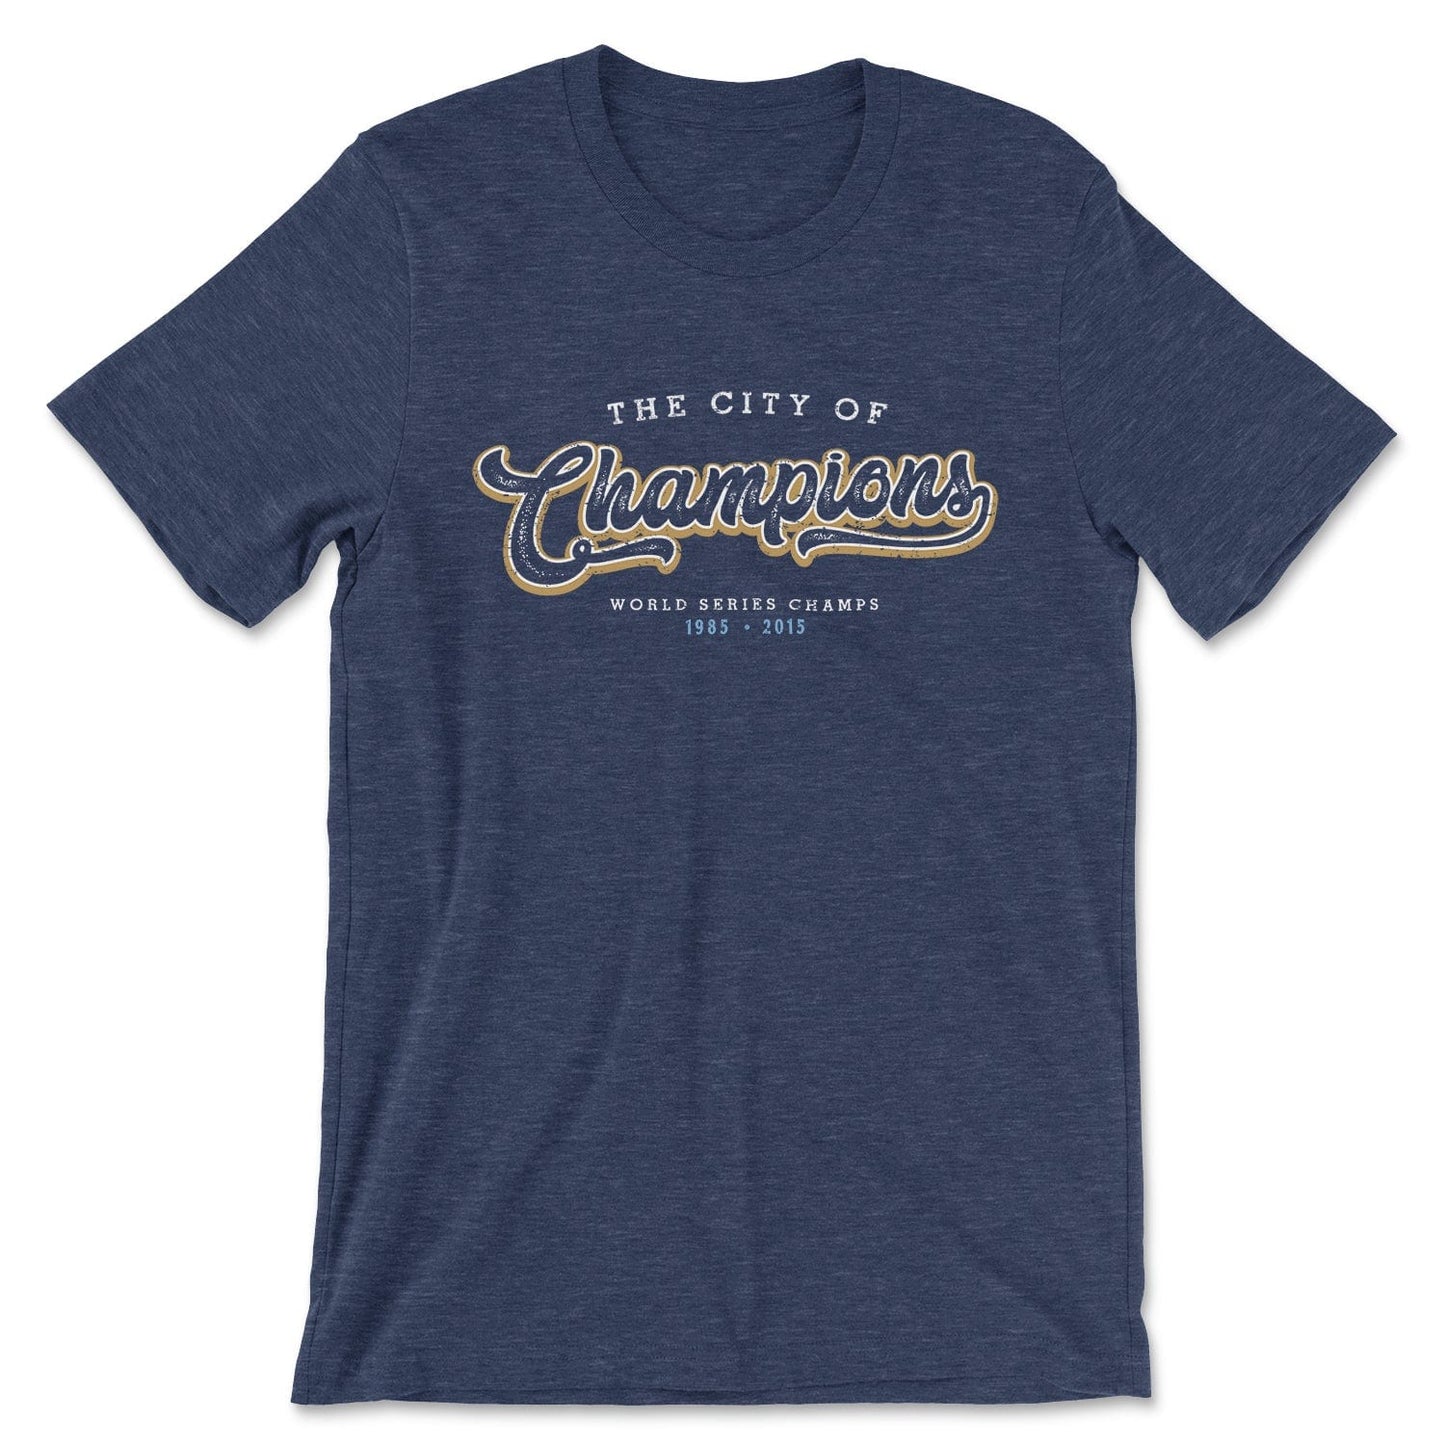 KC Swag Kansas City Royals white/gold CITY OF CHAMPIONS on heather navy t-shirt